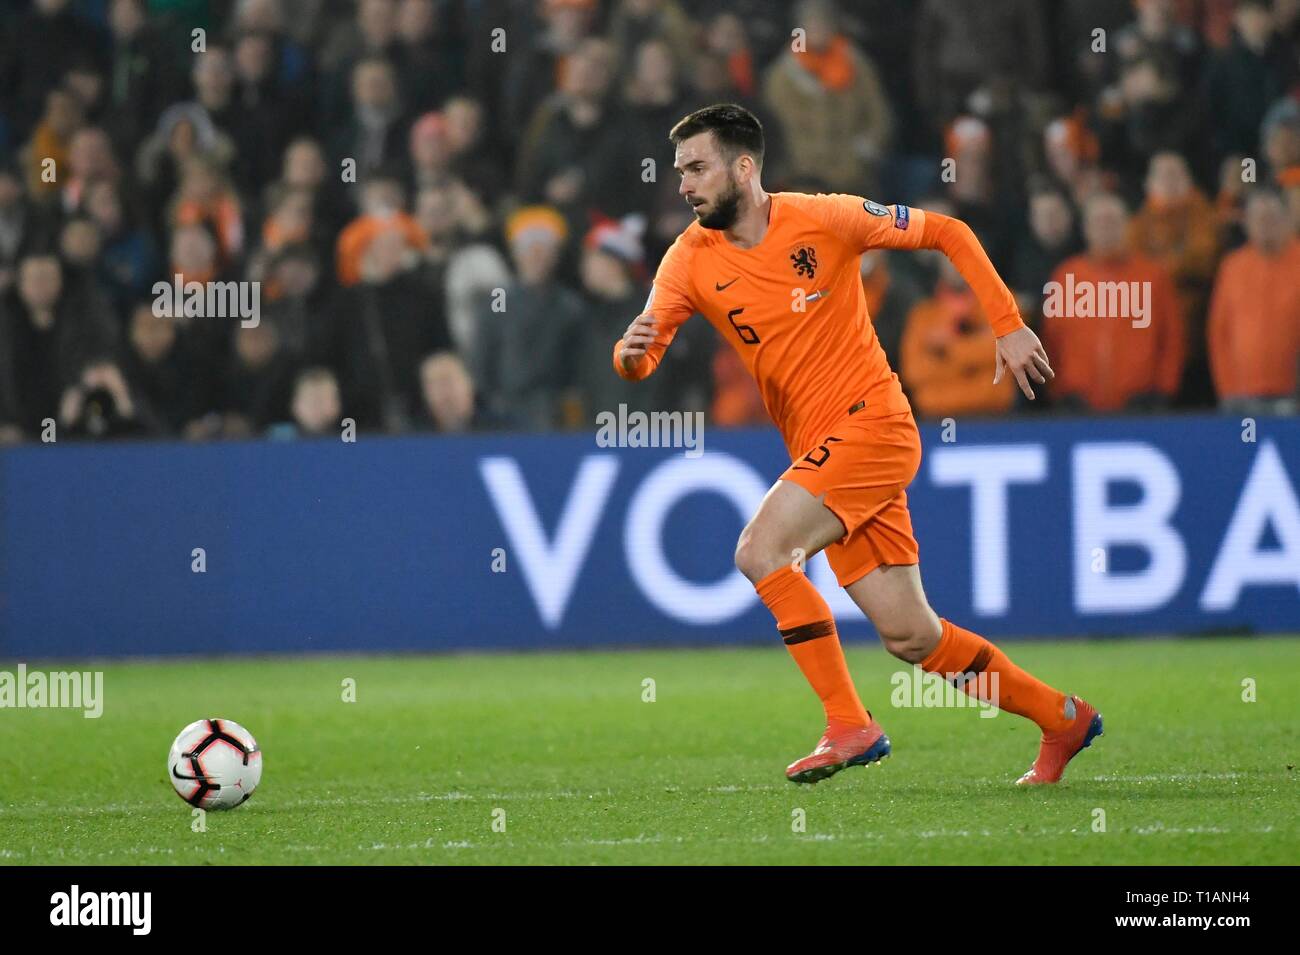 Football: Uefa Euro 2020 qualifier group C - 2018/2019 - Netherlands-Belarus at stadium De Kuip on March 21, 2019 in Rotterdam, Netherlands. Davy Propper Credit: Soenar Chamid/SCS/AFLO/Alamy Live News Stock Photo